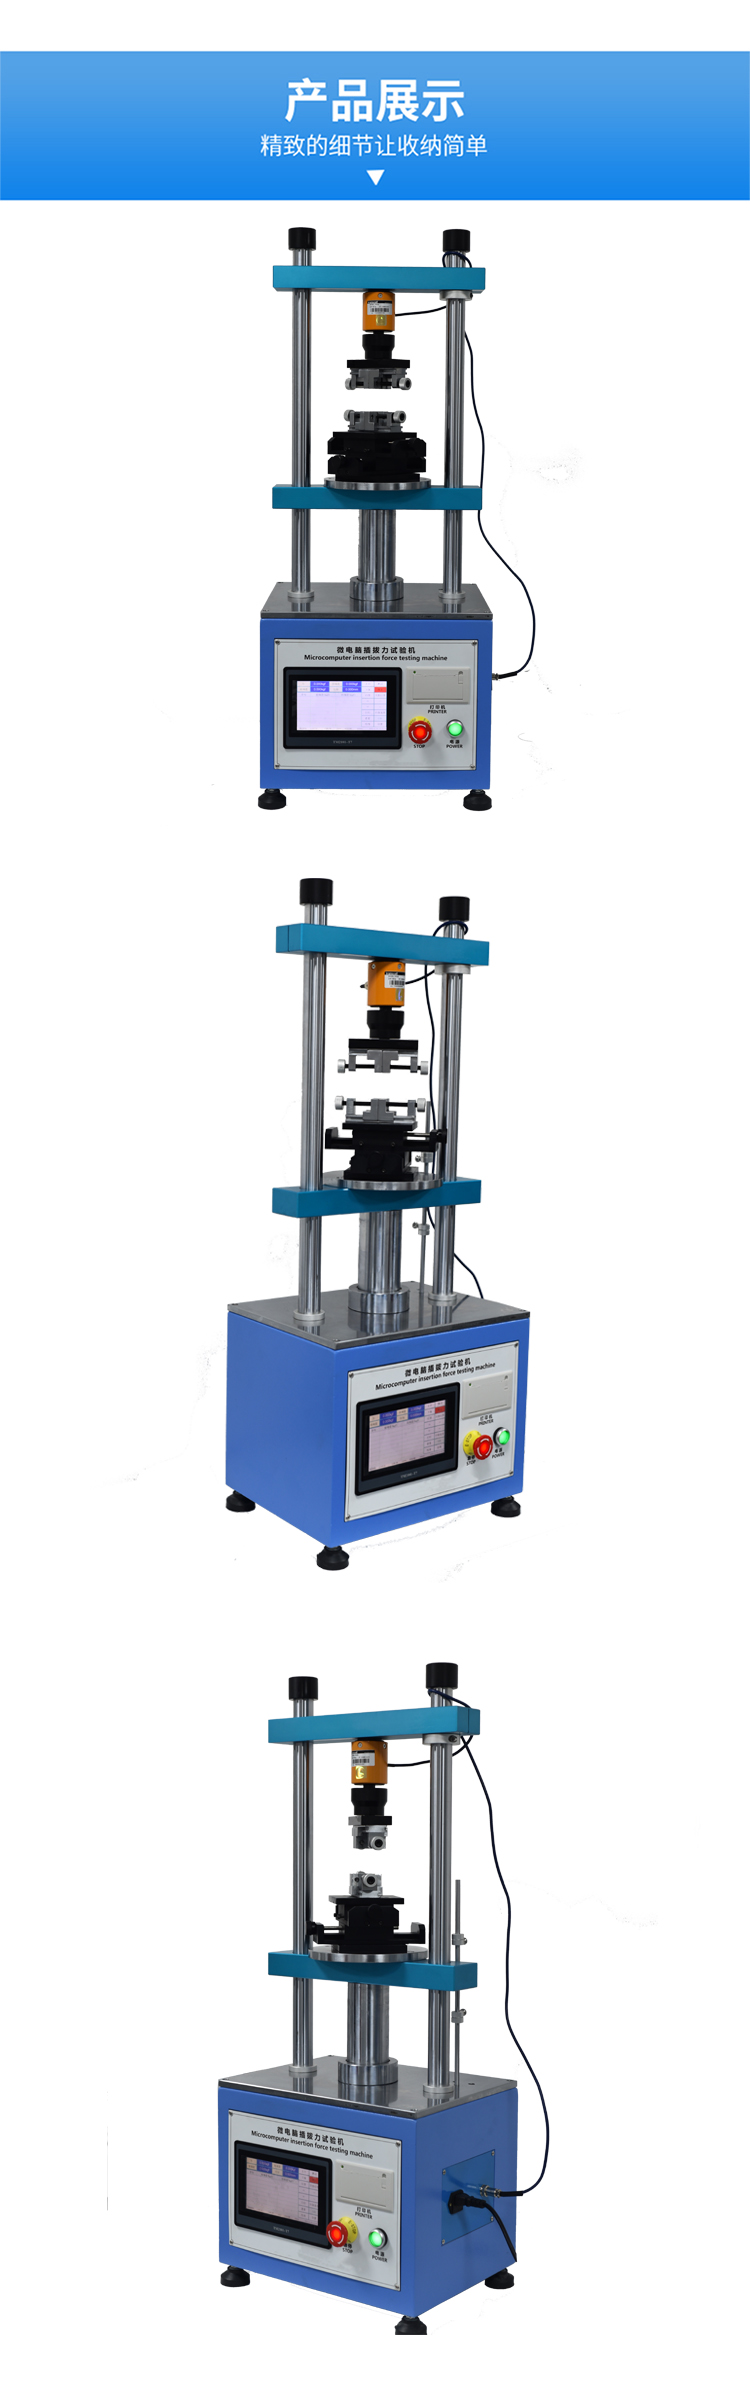 Microcomputer vertical insertion and extraction force testing machine, automatic insertion and extraction life testing of charging box, force value display with printing